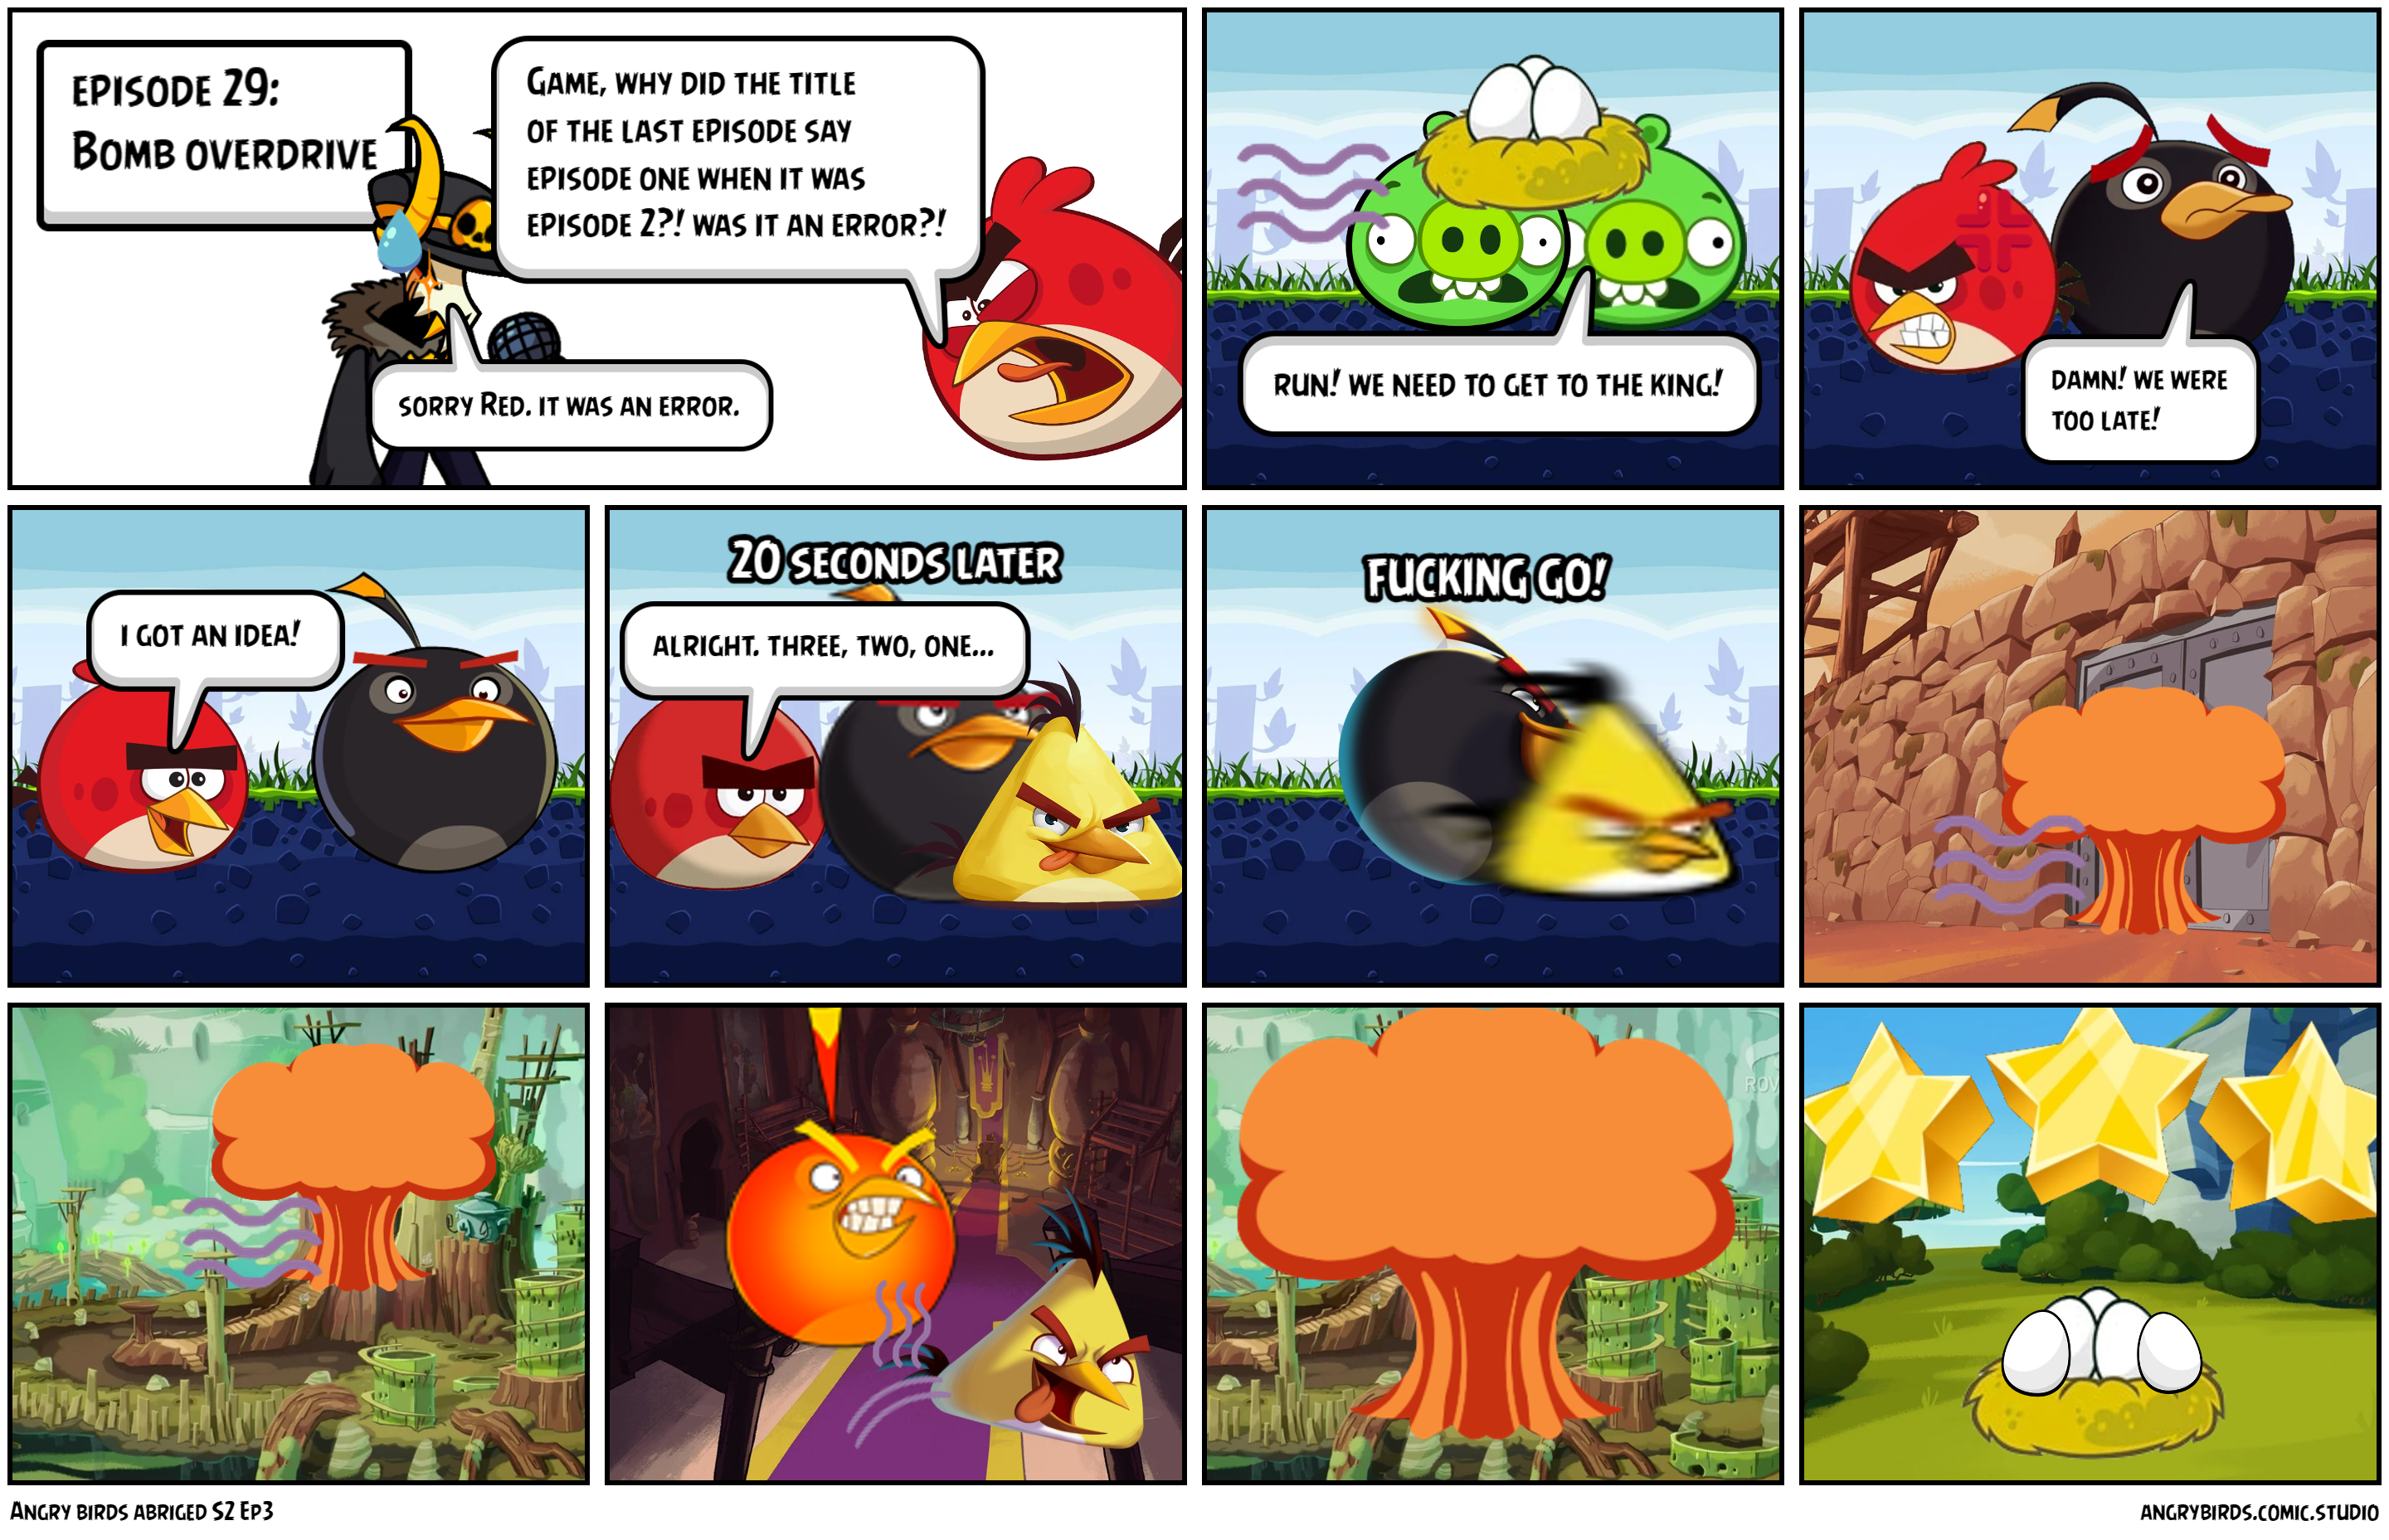 Angry birds abriged S2 Ep3